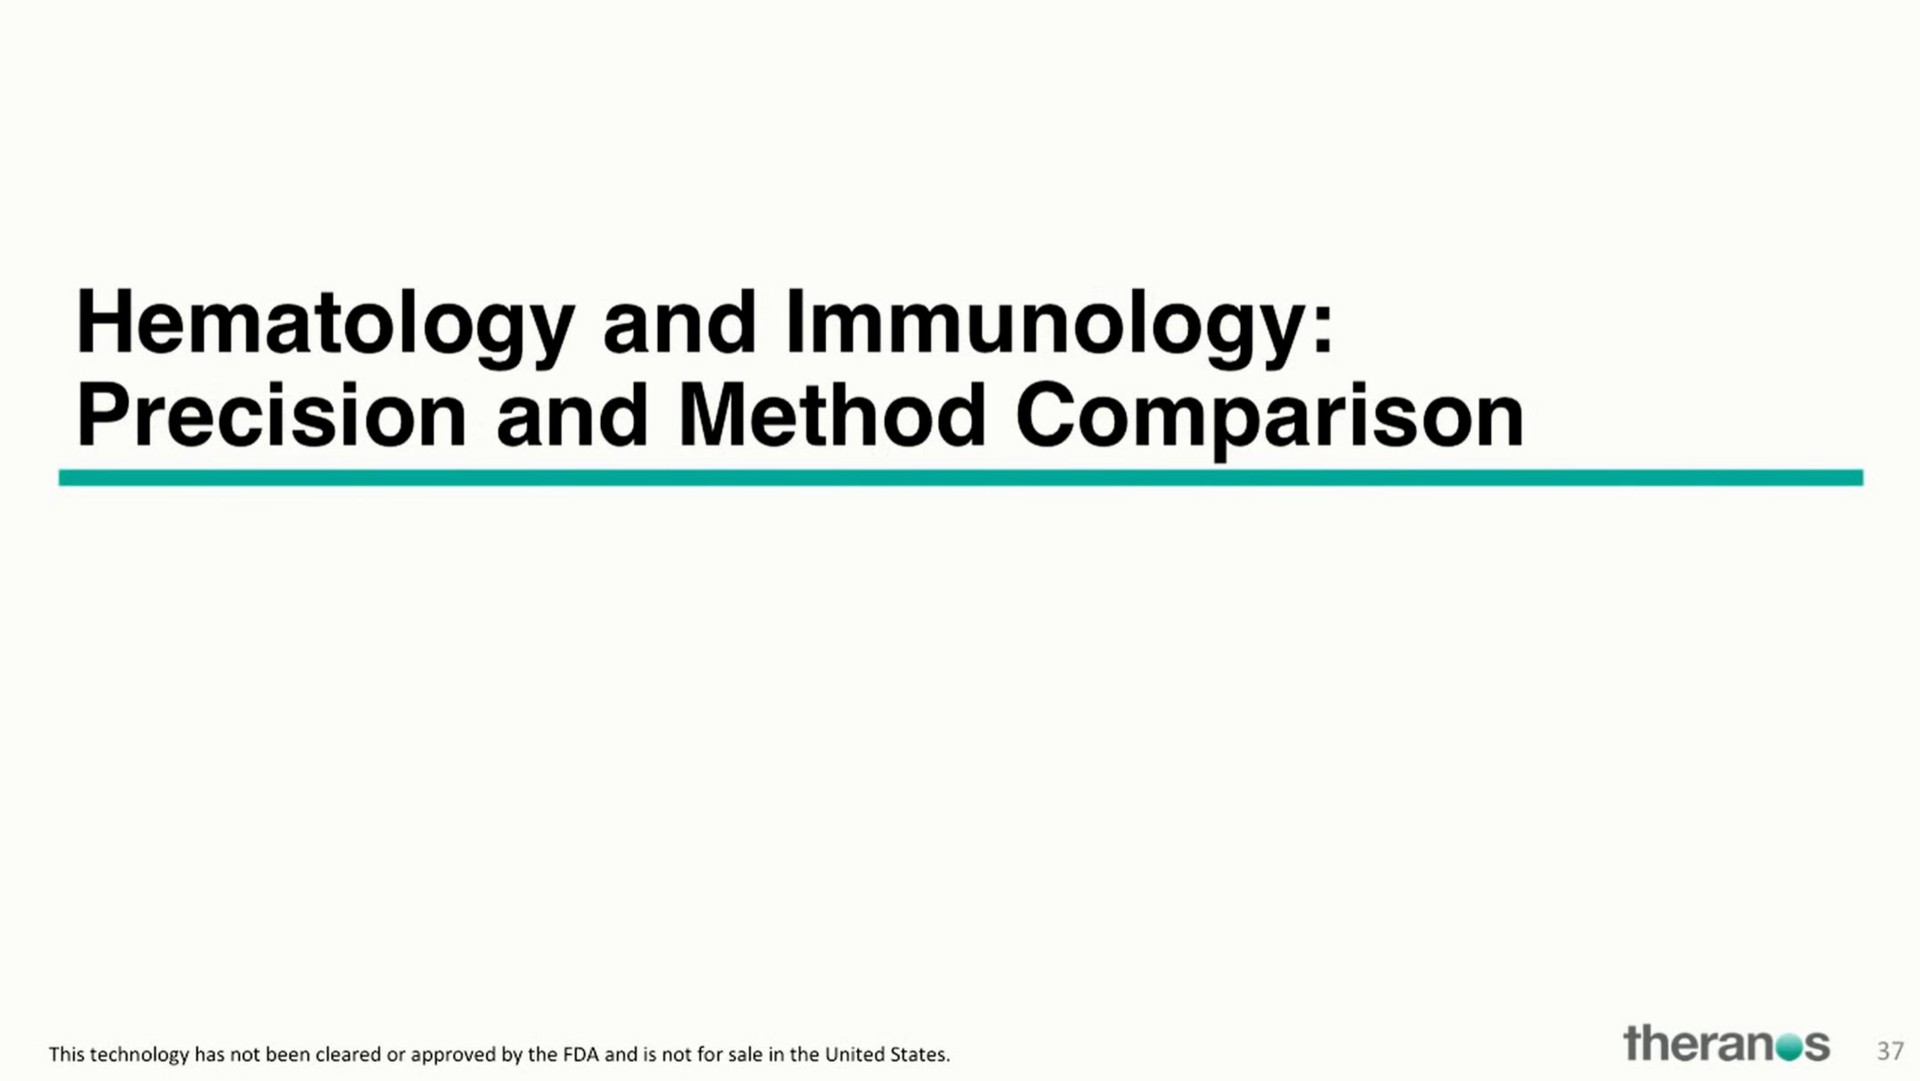 hematology and immunology precision and method comparison | Theranos